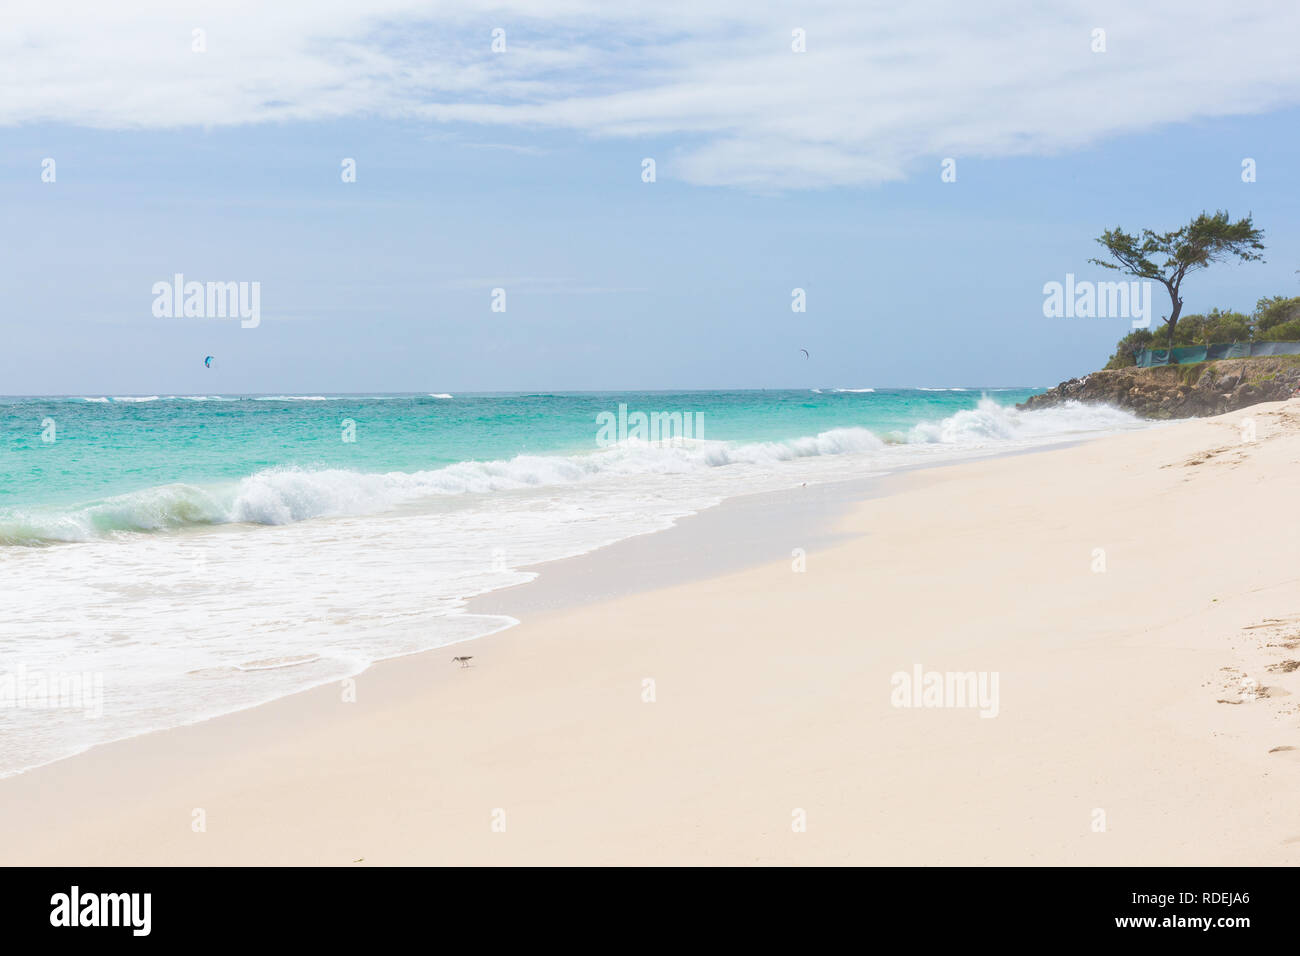 A white beach at Silver Sands on Barbados. Ocean waves roll in. Kitesurfers play in the safe waters off-shore. Stock Photo